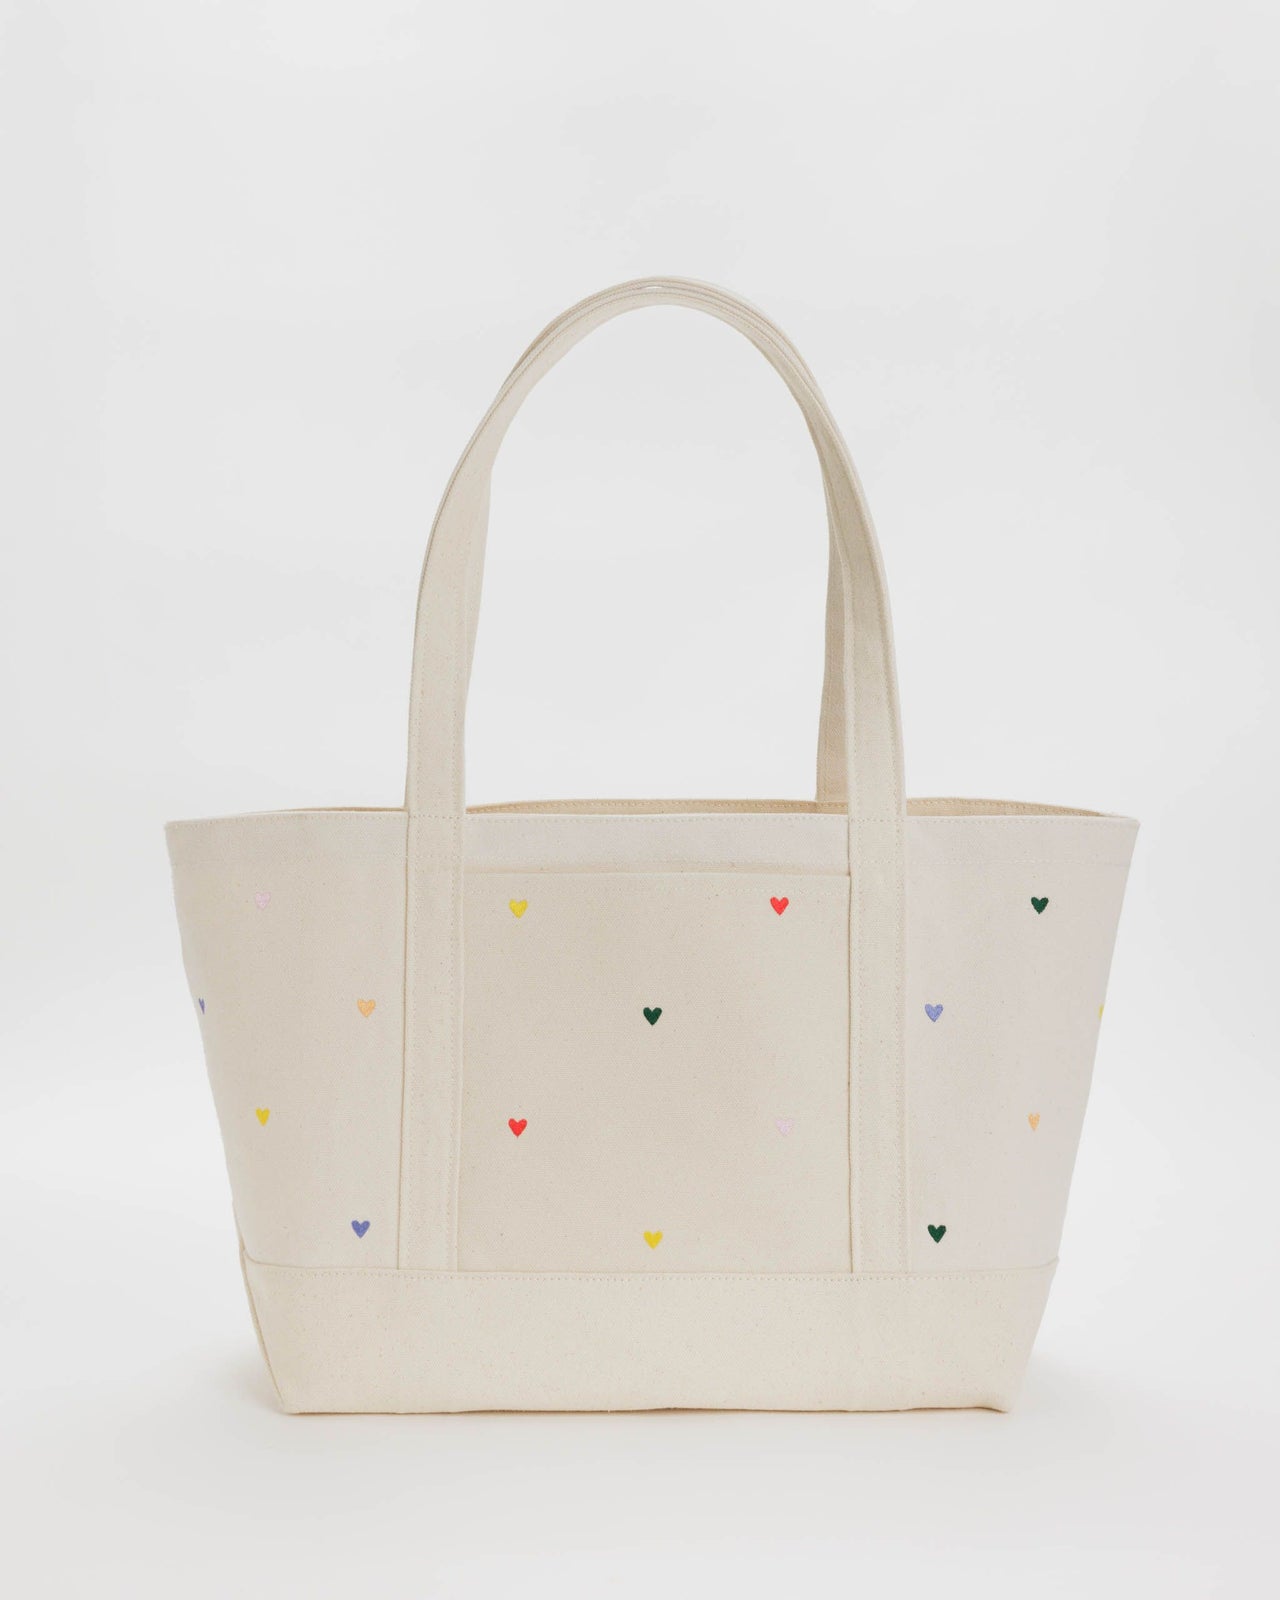 Medium Heavyweight Canvas Tote - Embroidered Hearts